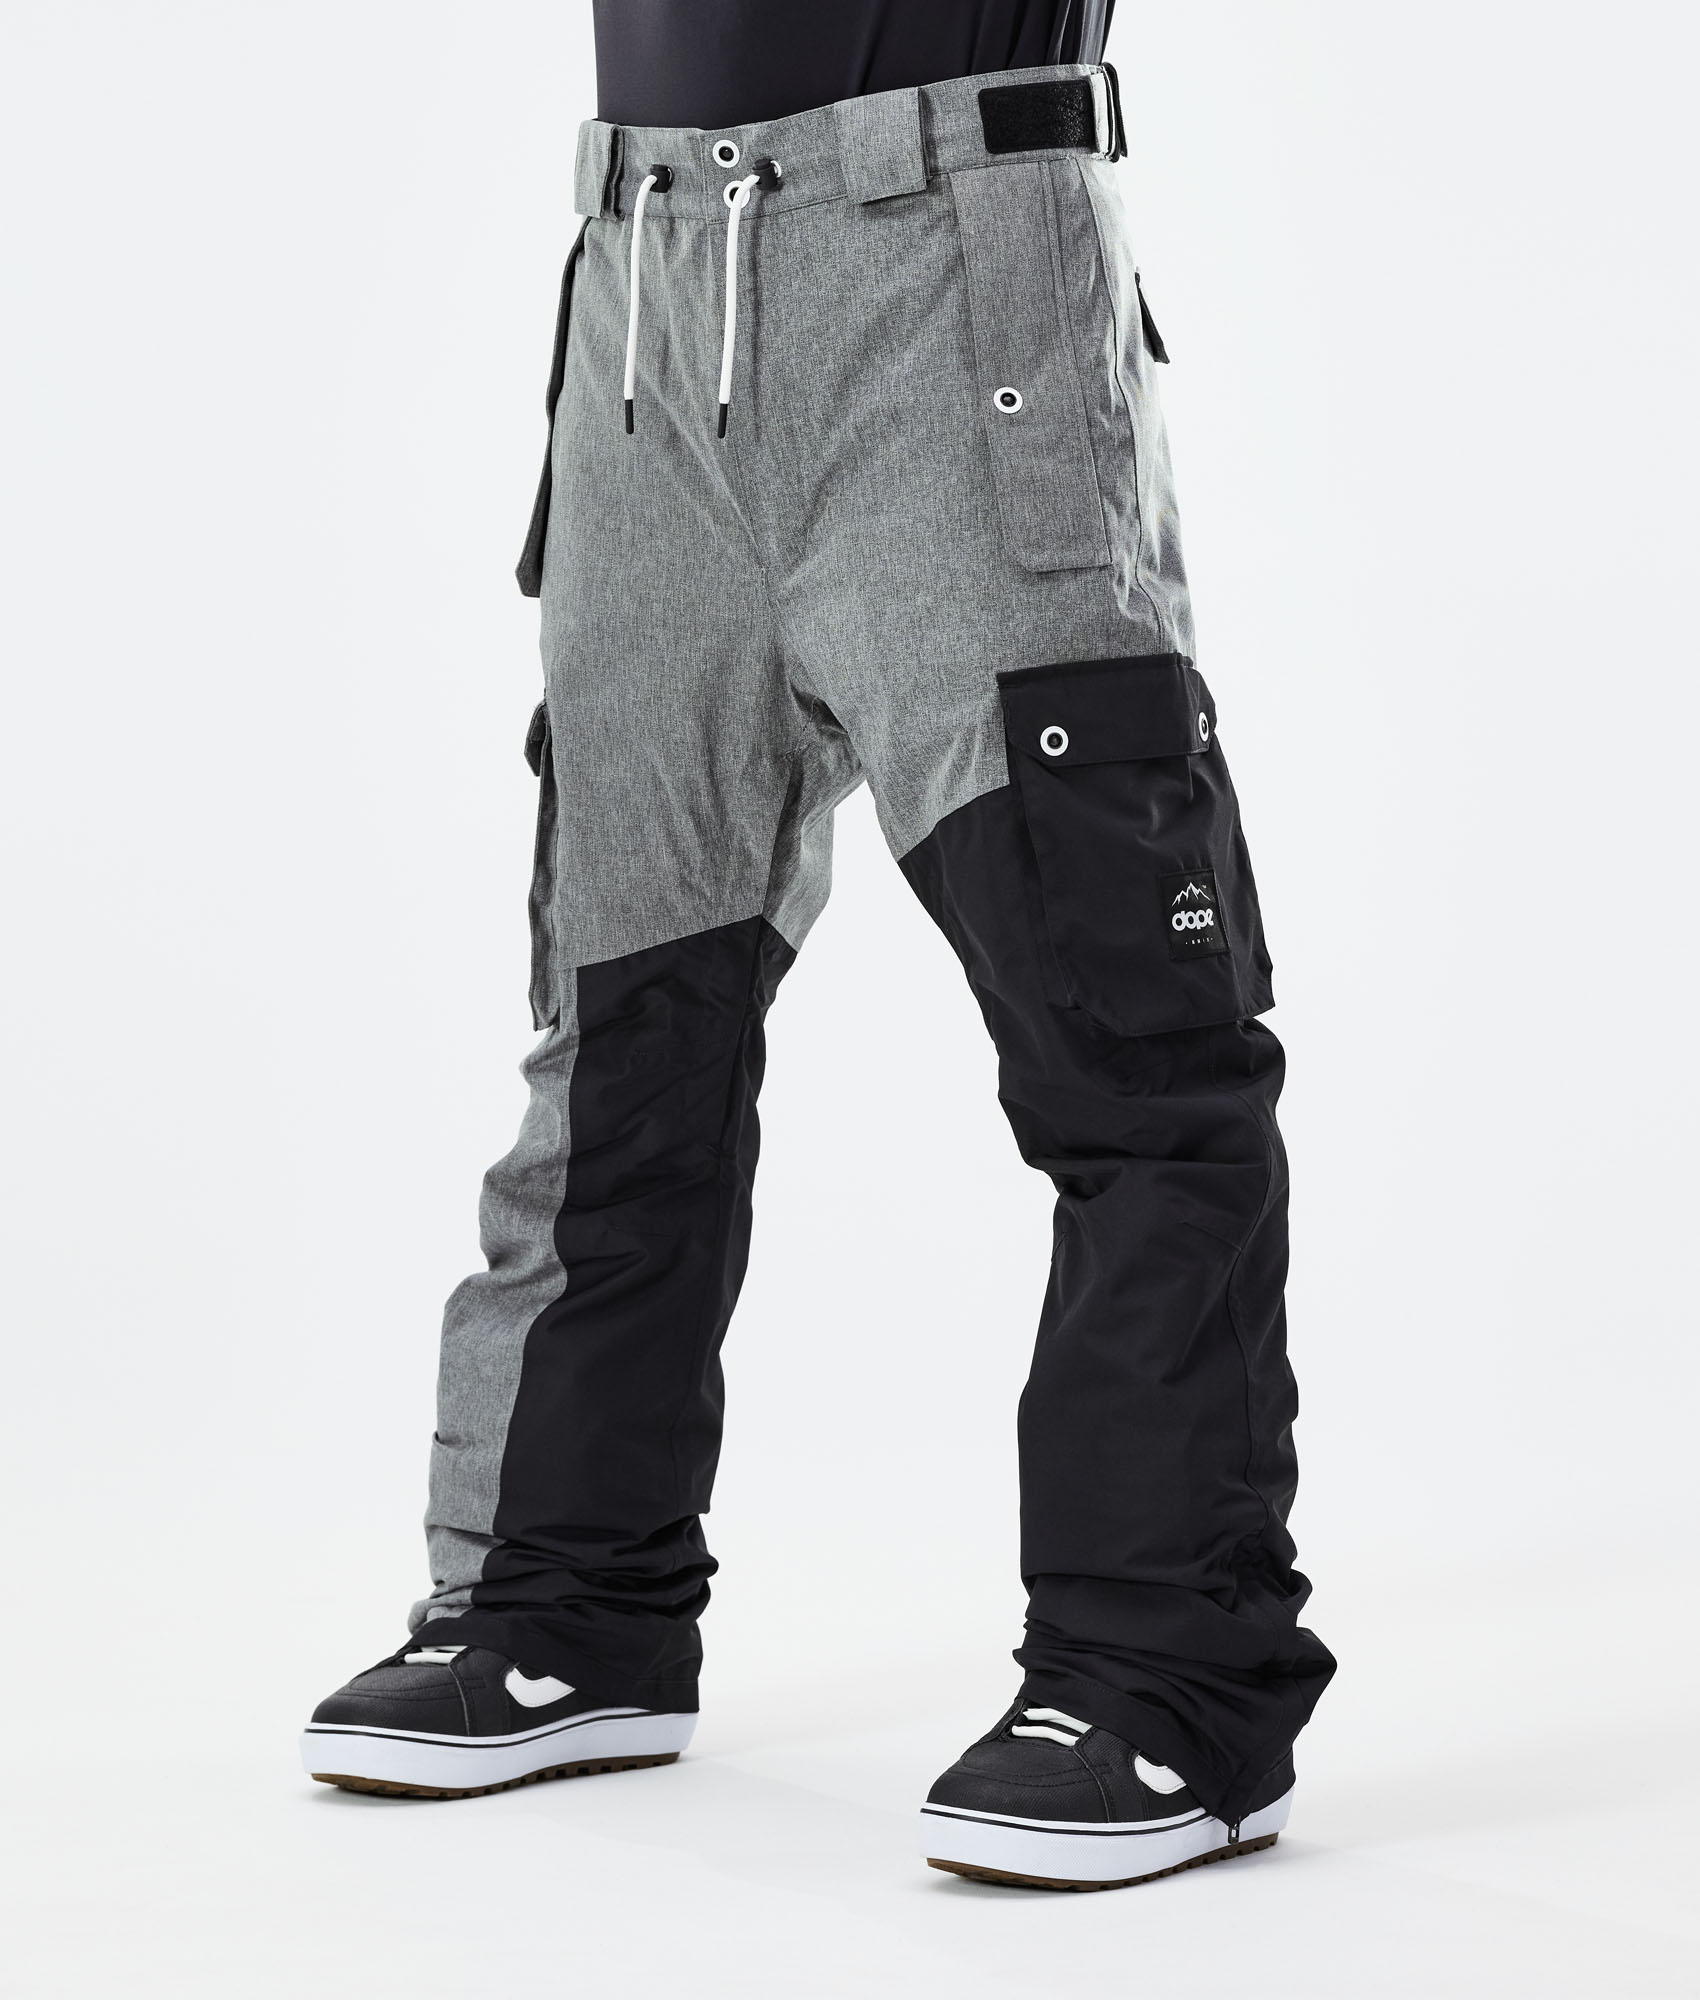 Men's Cosone TEAM Series Street Fashion Winter Snowboard Pants |  Snowshred.official